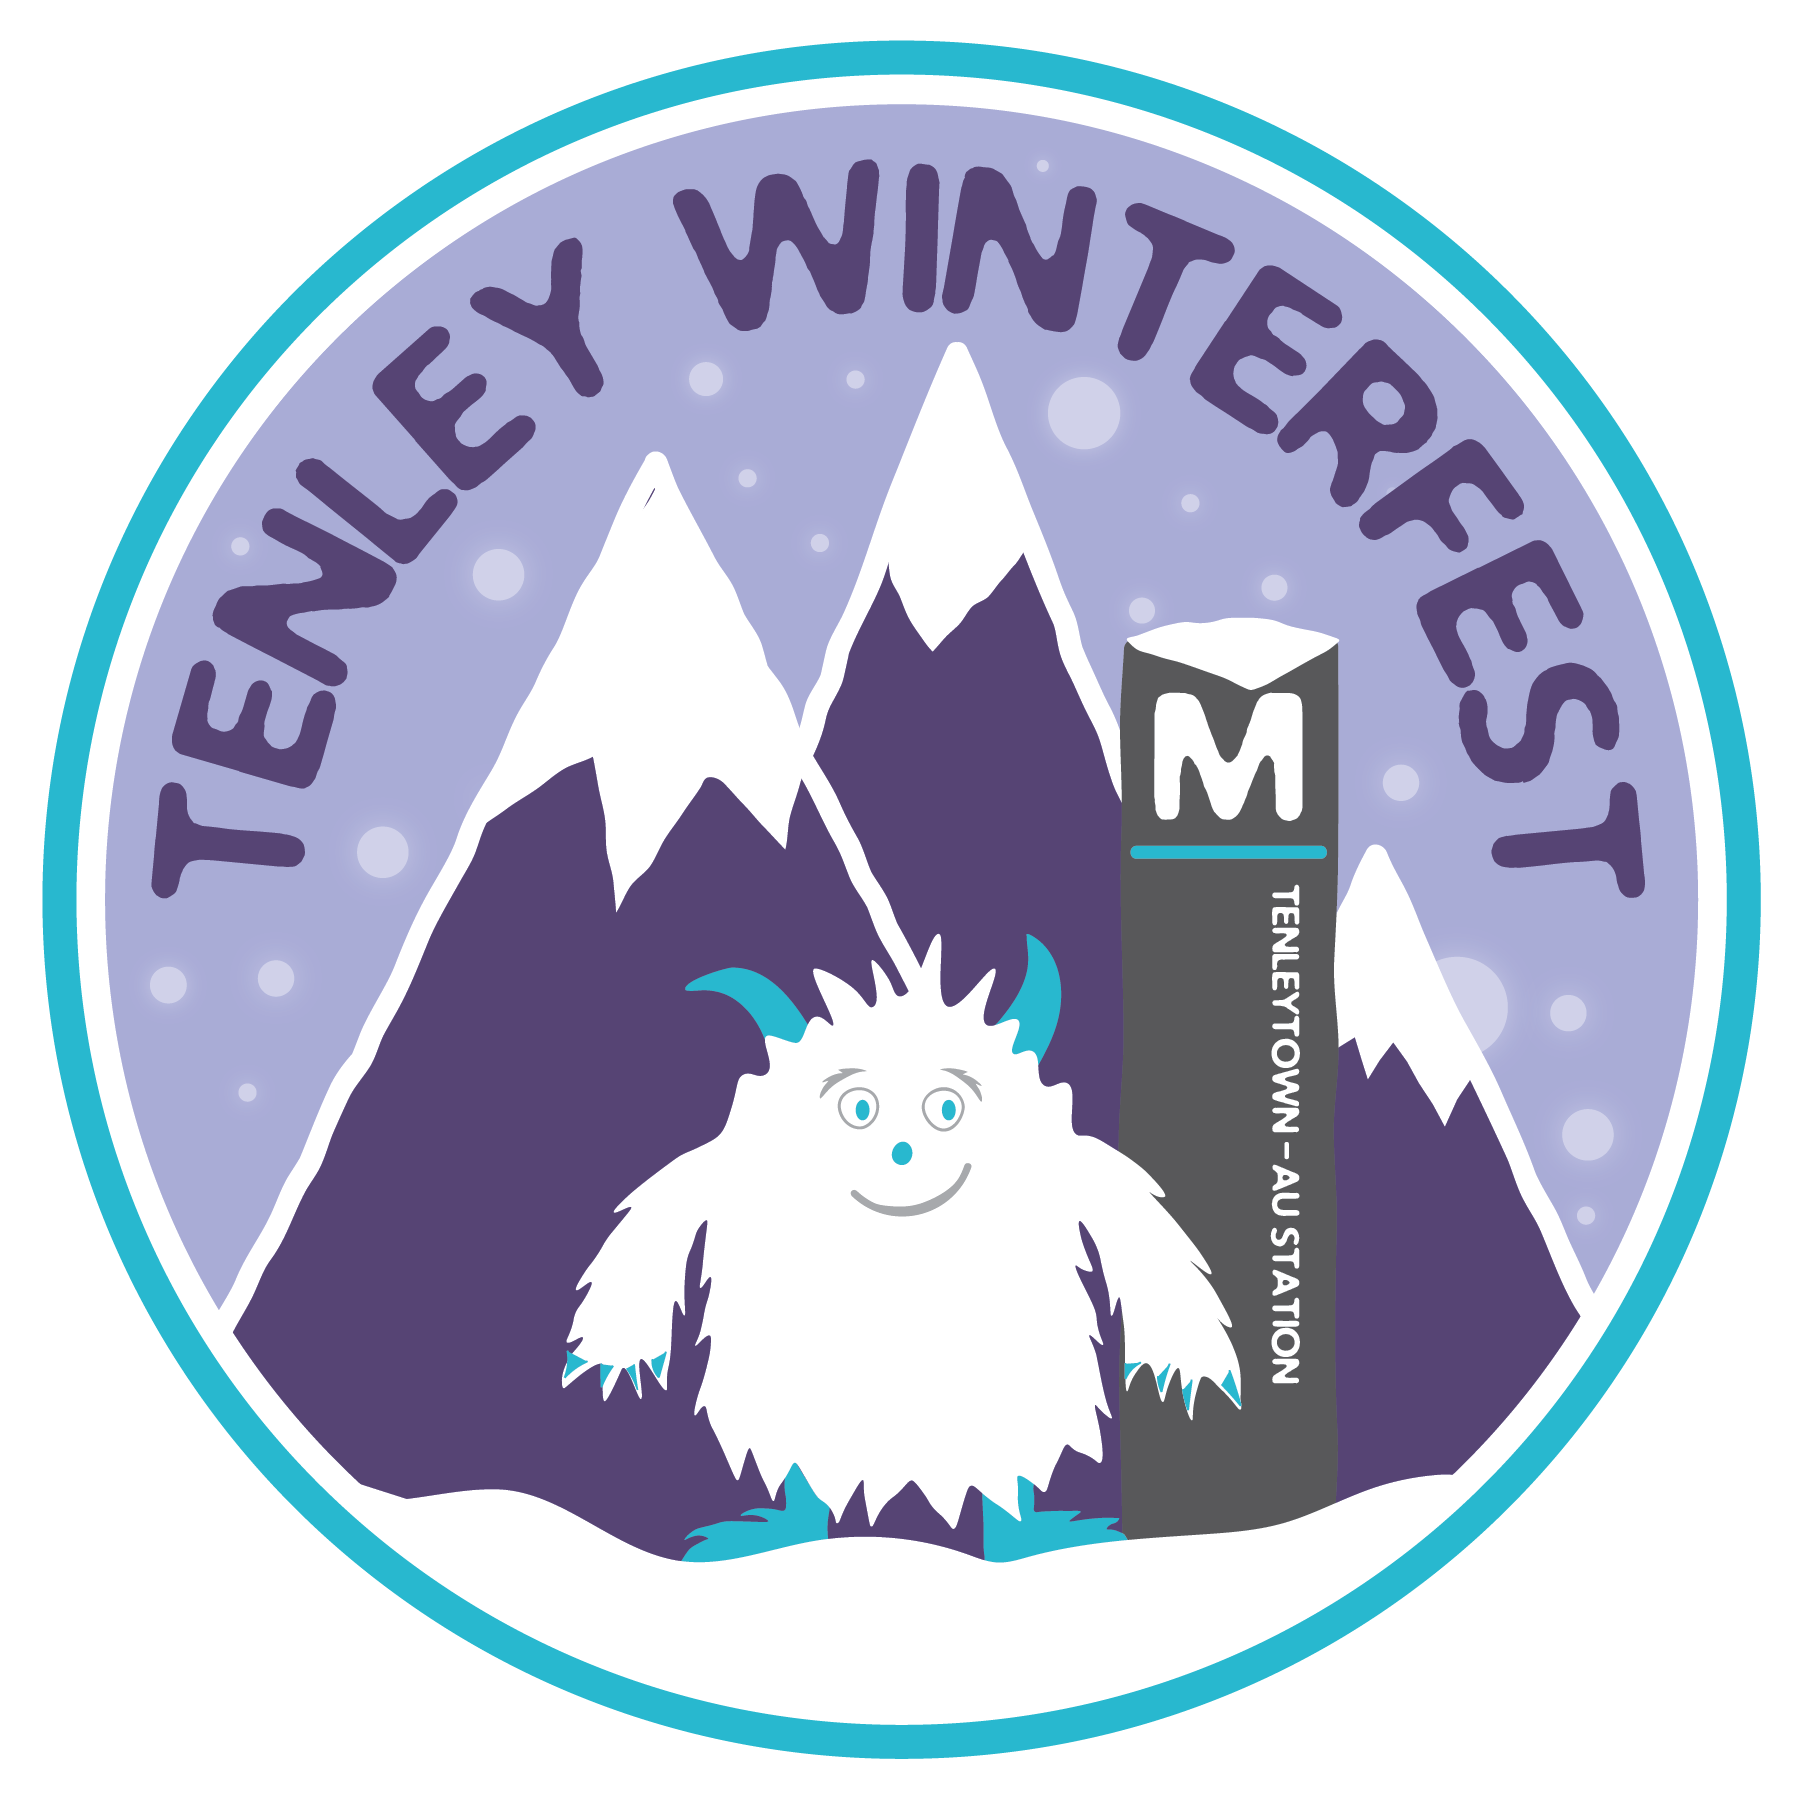 The words "Tenleytown Winterfest" above an illustration of a yeti standing by the Tenleytown metro sign